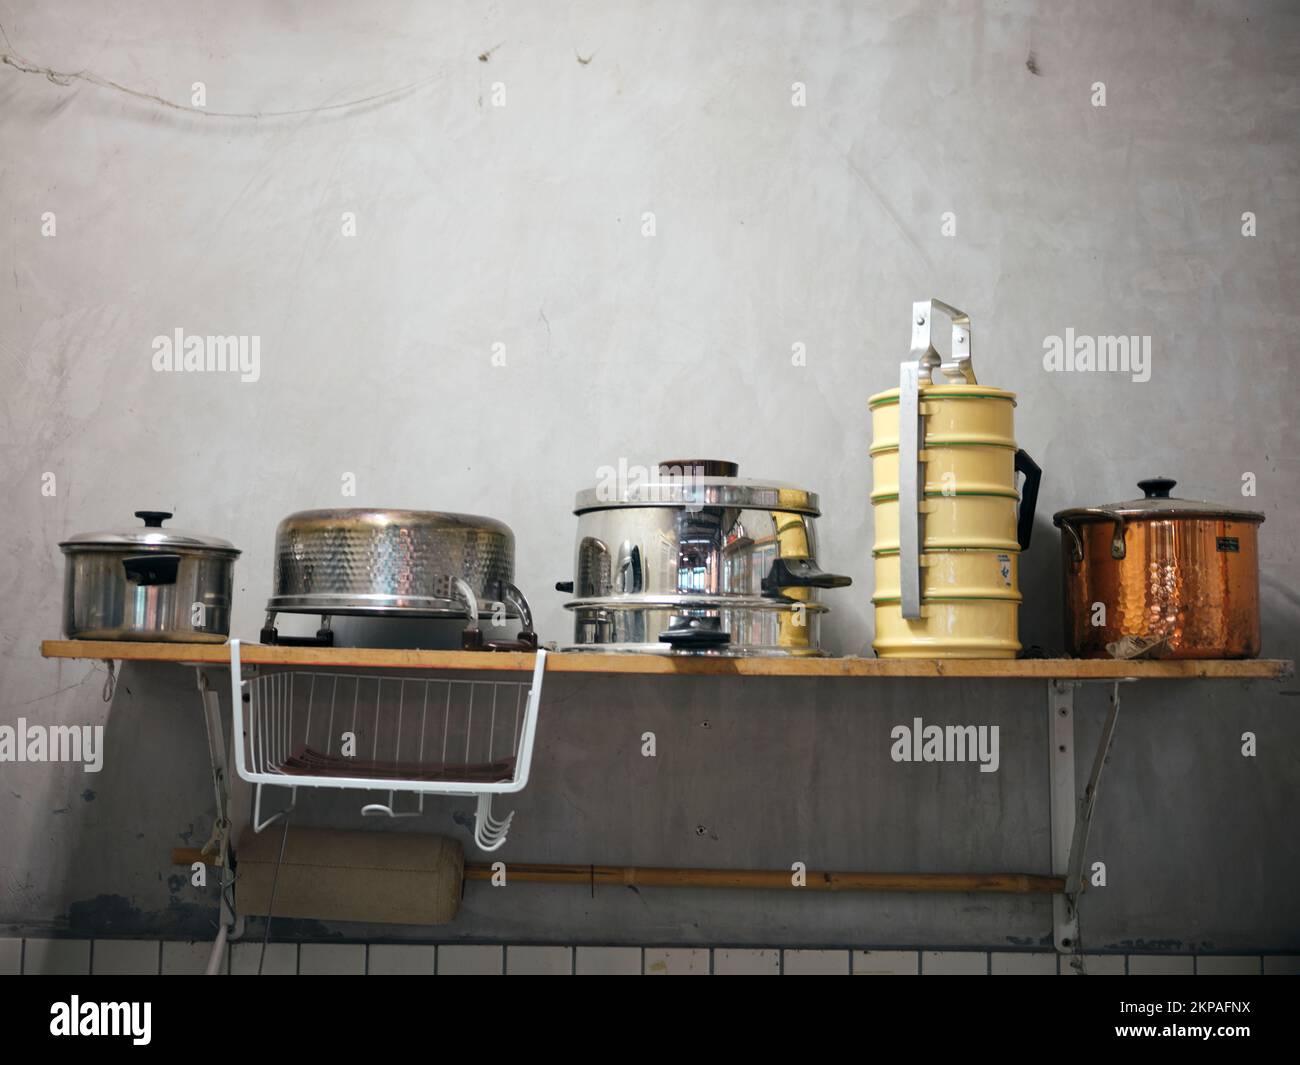 Old kitchen ware hanging on shelf. Different size of pans and kitchen ware on the wall, Home decoration, Kitchen background. Stock Photo